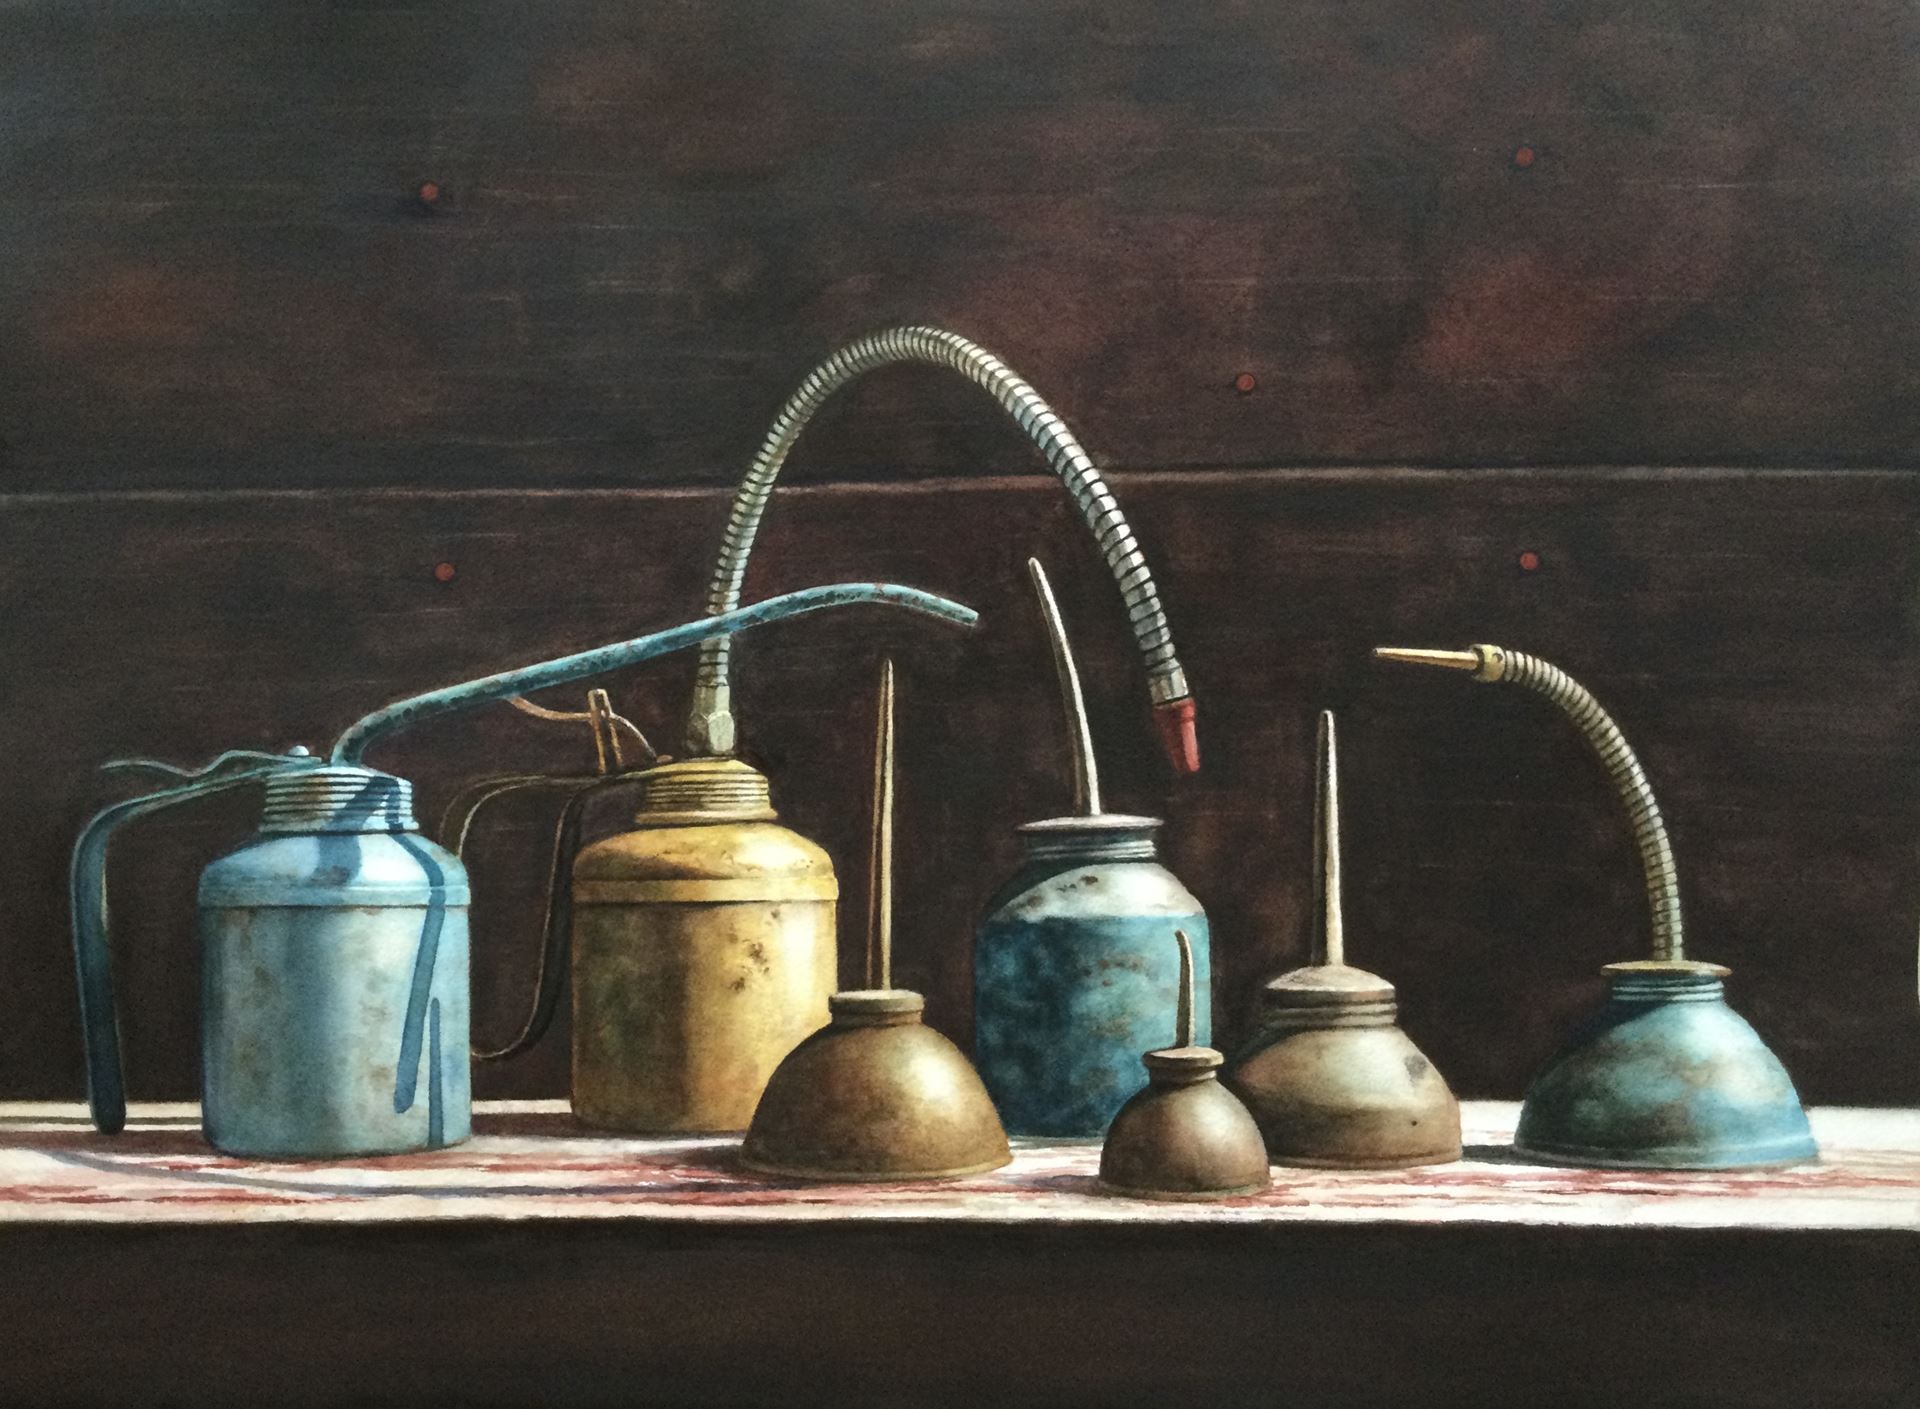 Watermedia painting by K. Norman, still life of oil cans.